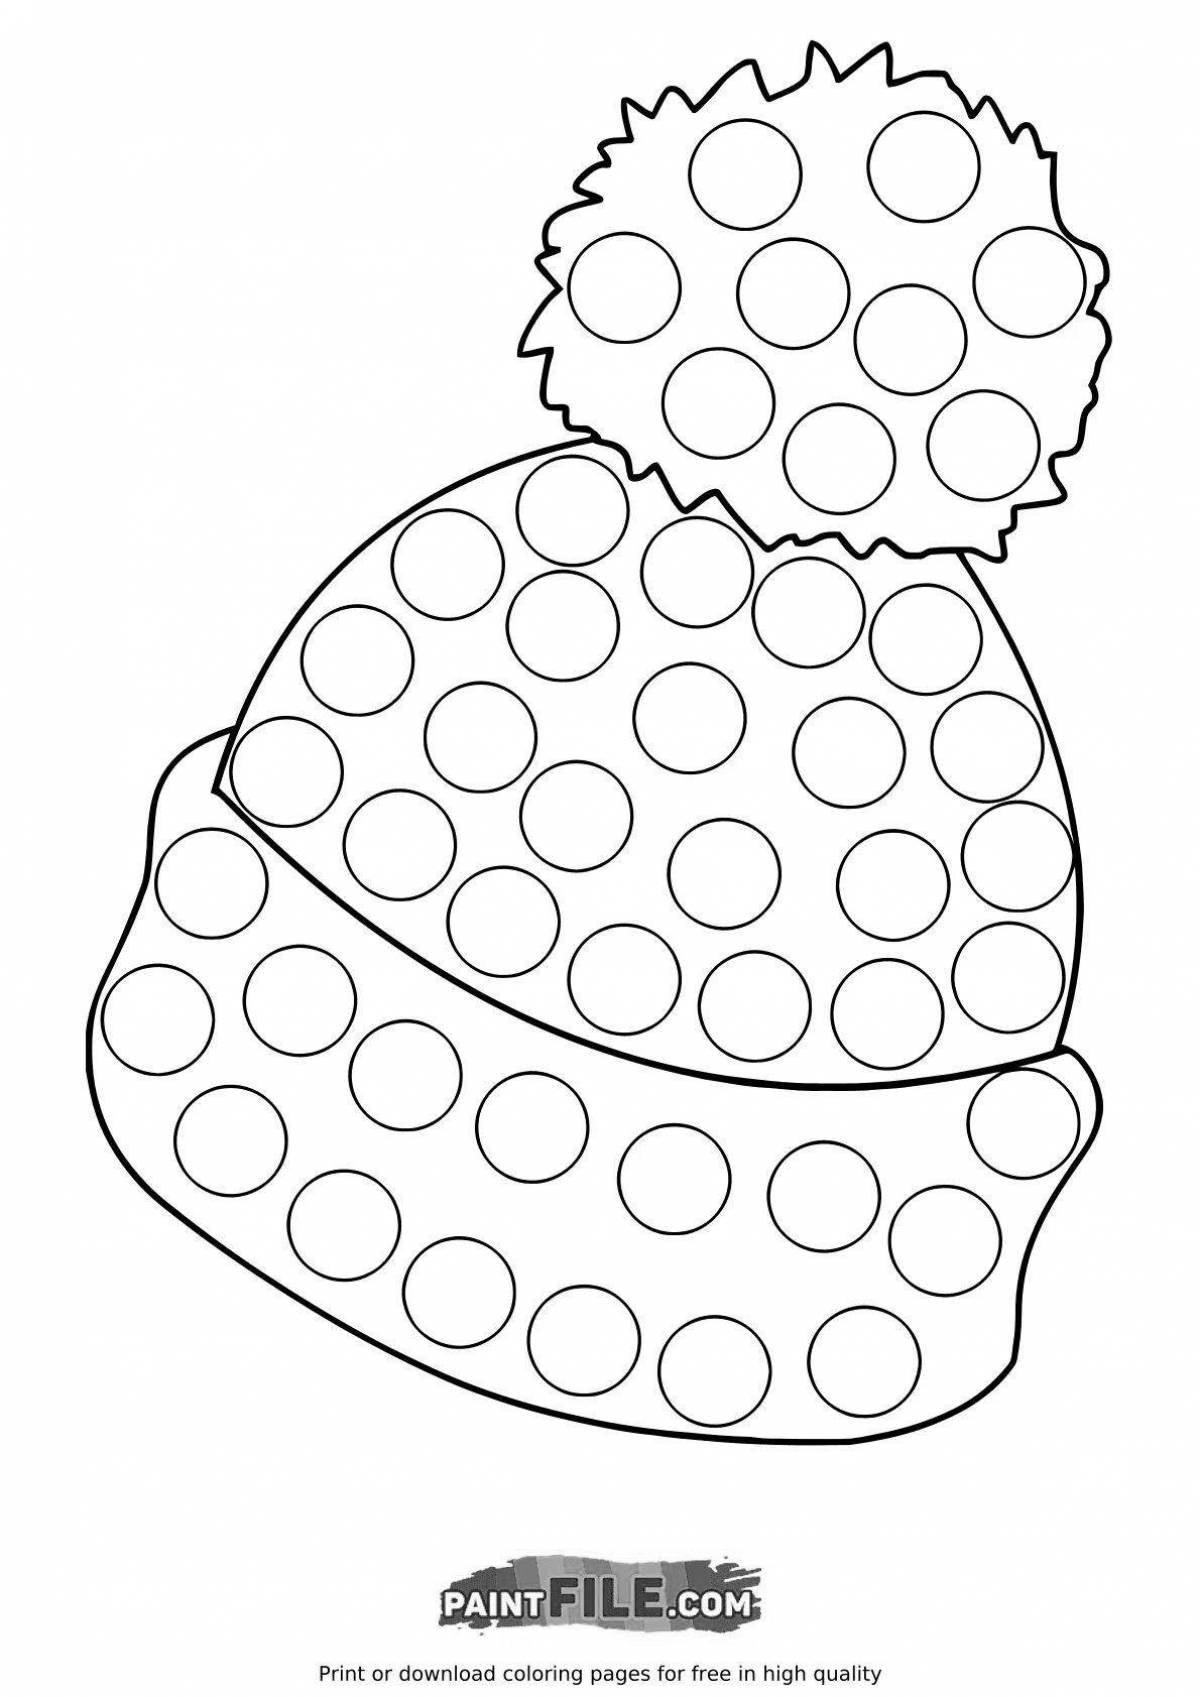 Coloring book shiny baby hat